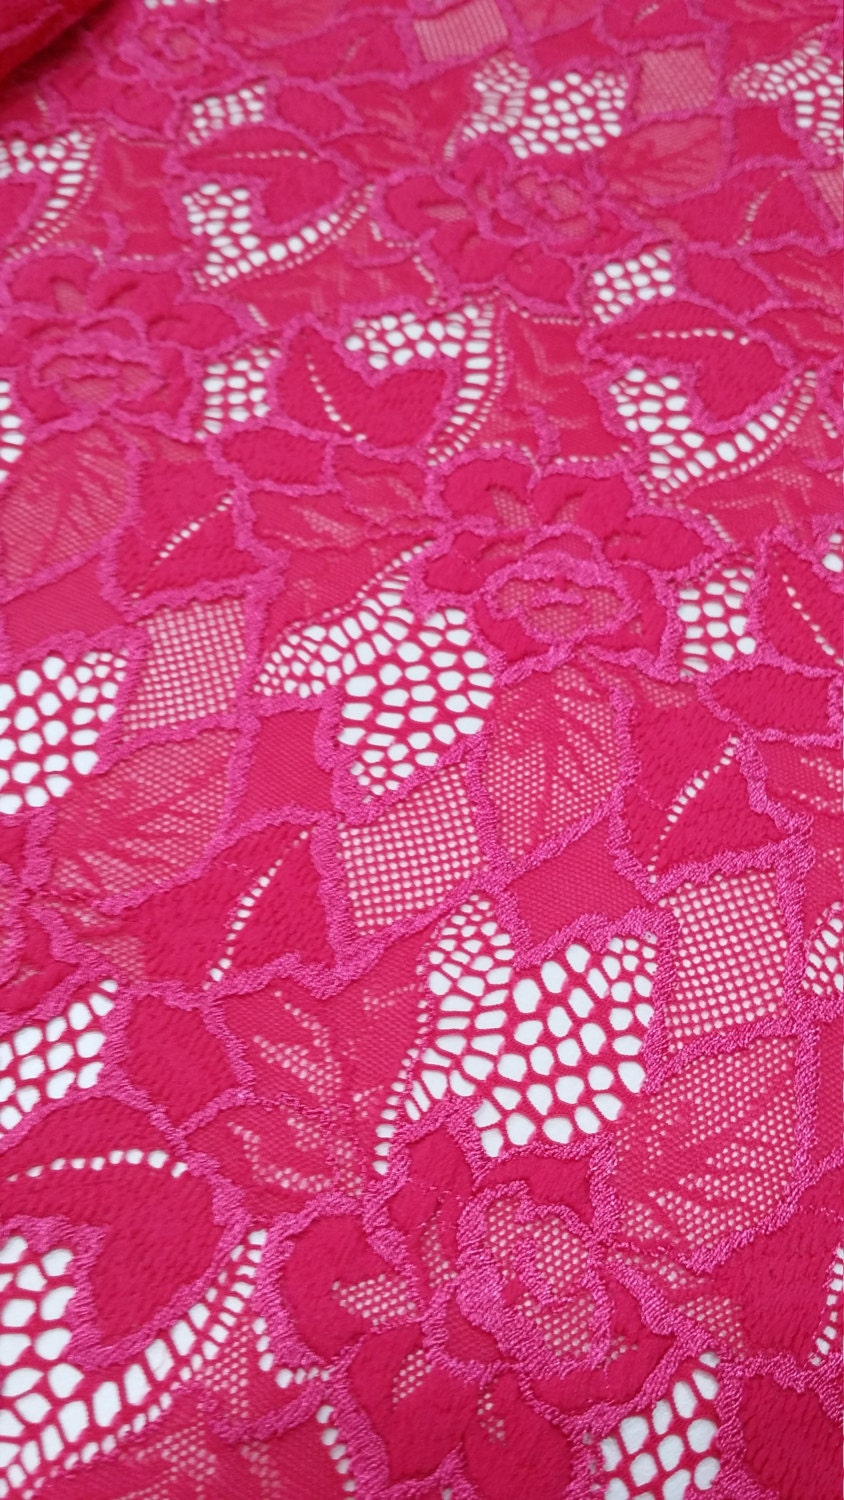 Pink Stretch Lace Fabric by the Yard France Lace Chantilly - Etsy